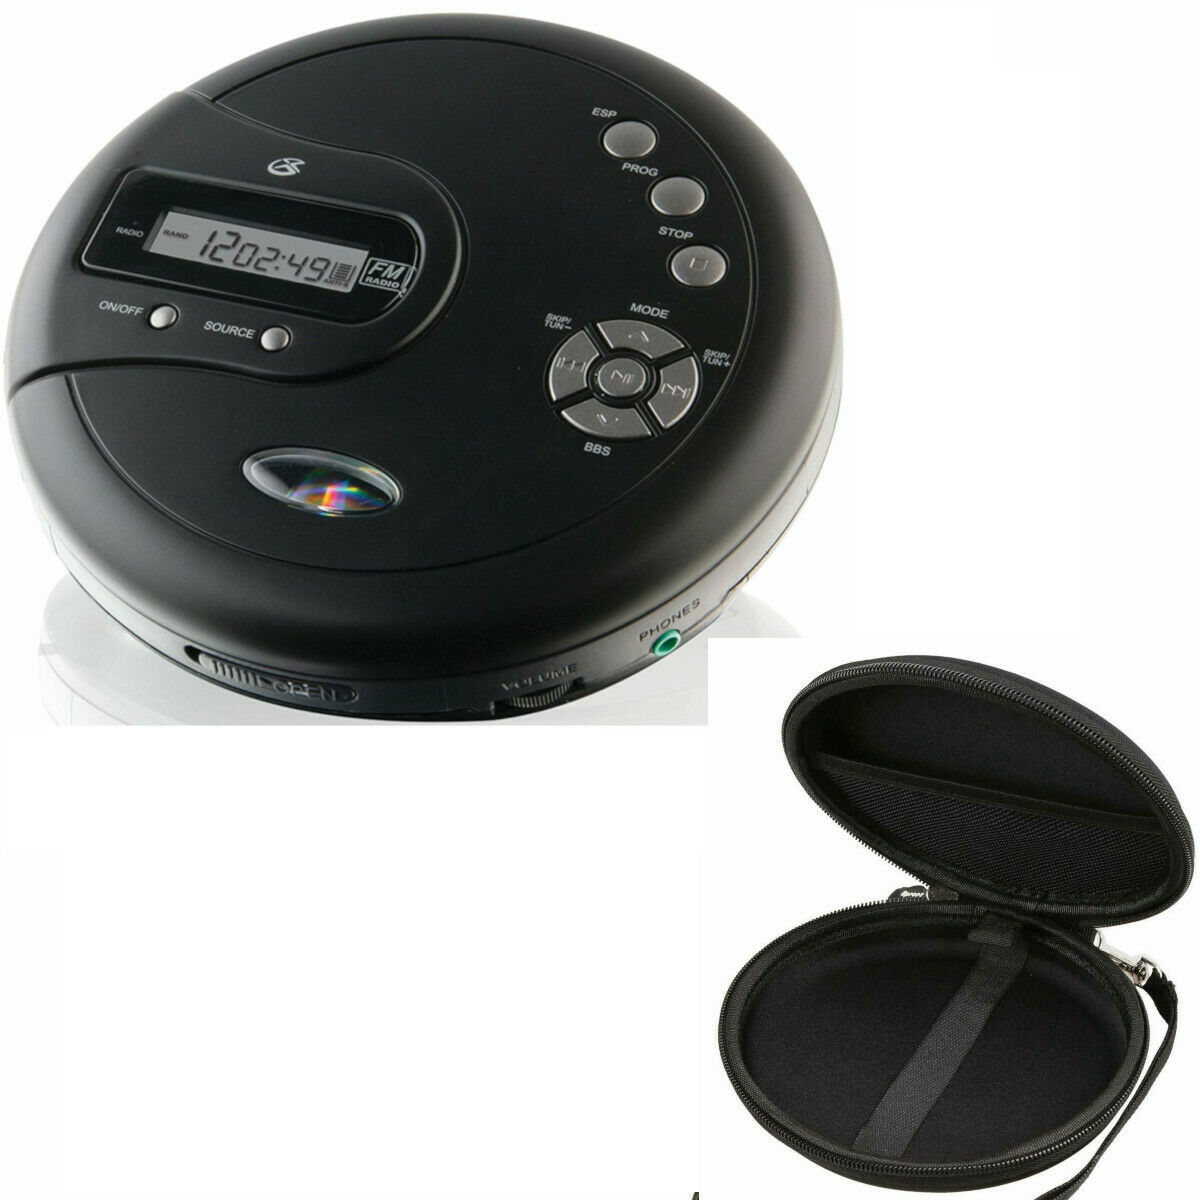 Cd Disk Player Portable With Bass Boost Anti-skip Protection Cd-r/rw Or A Case